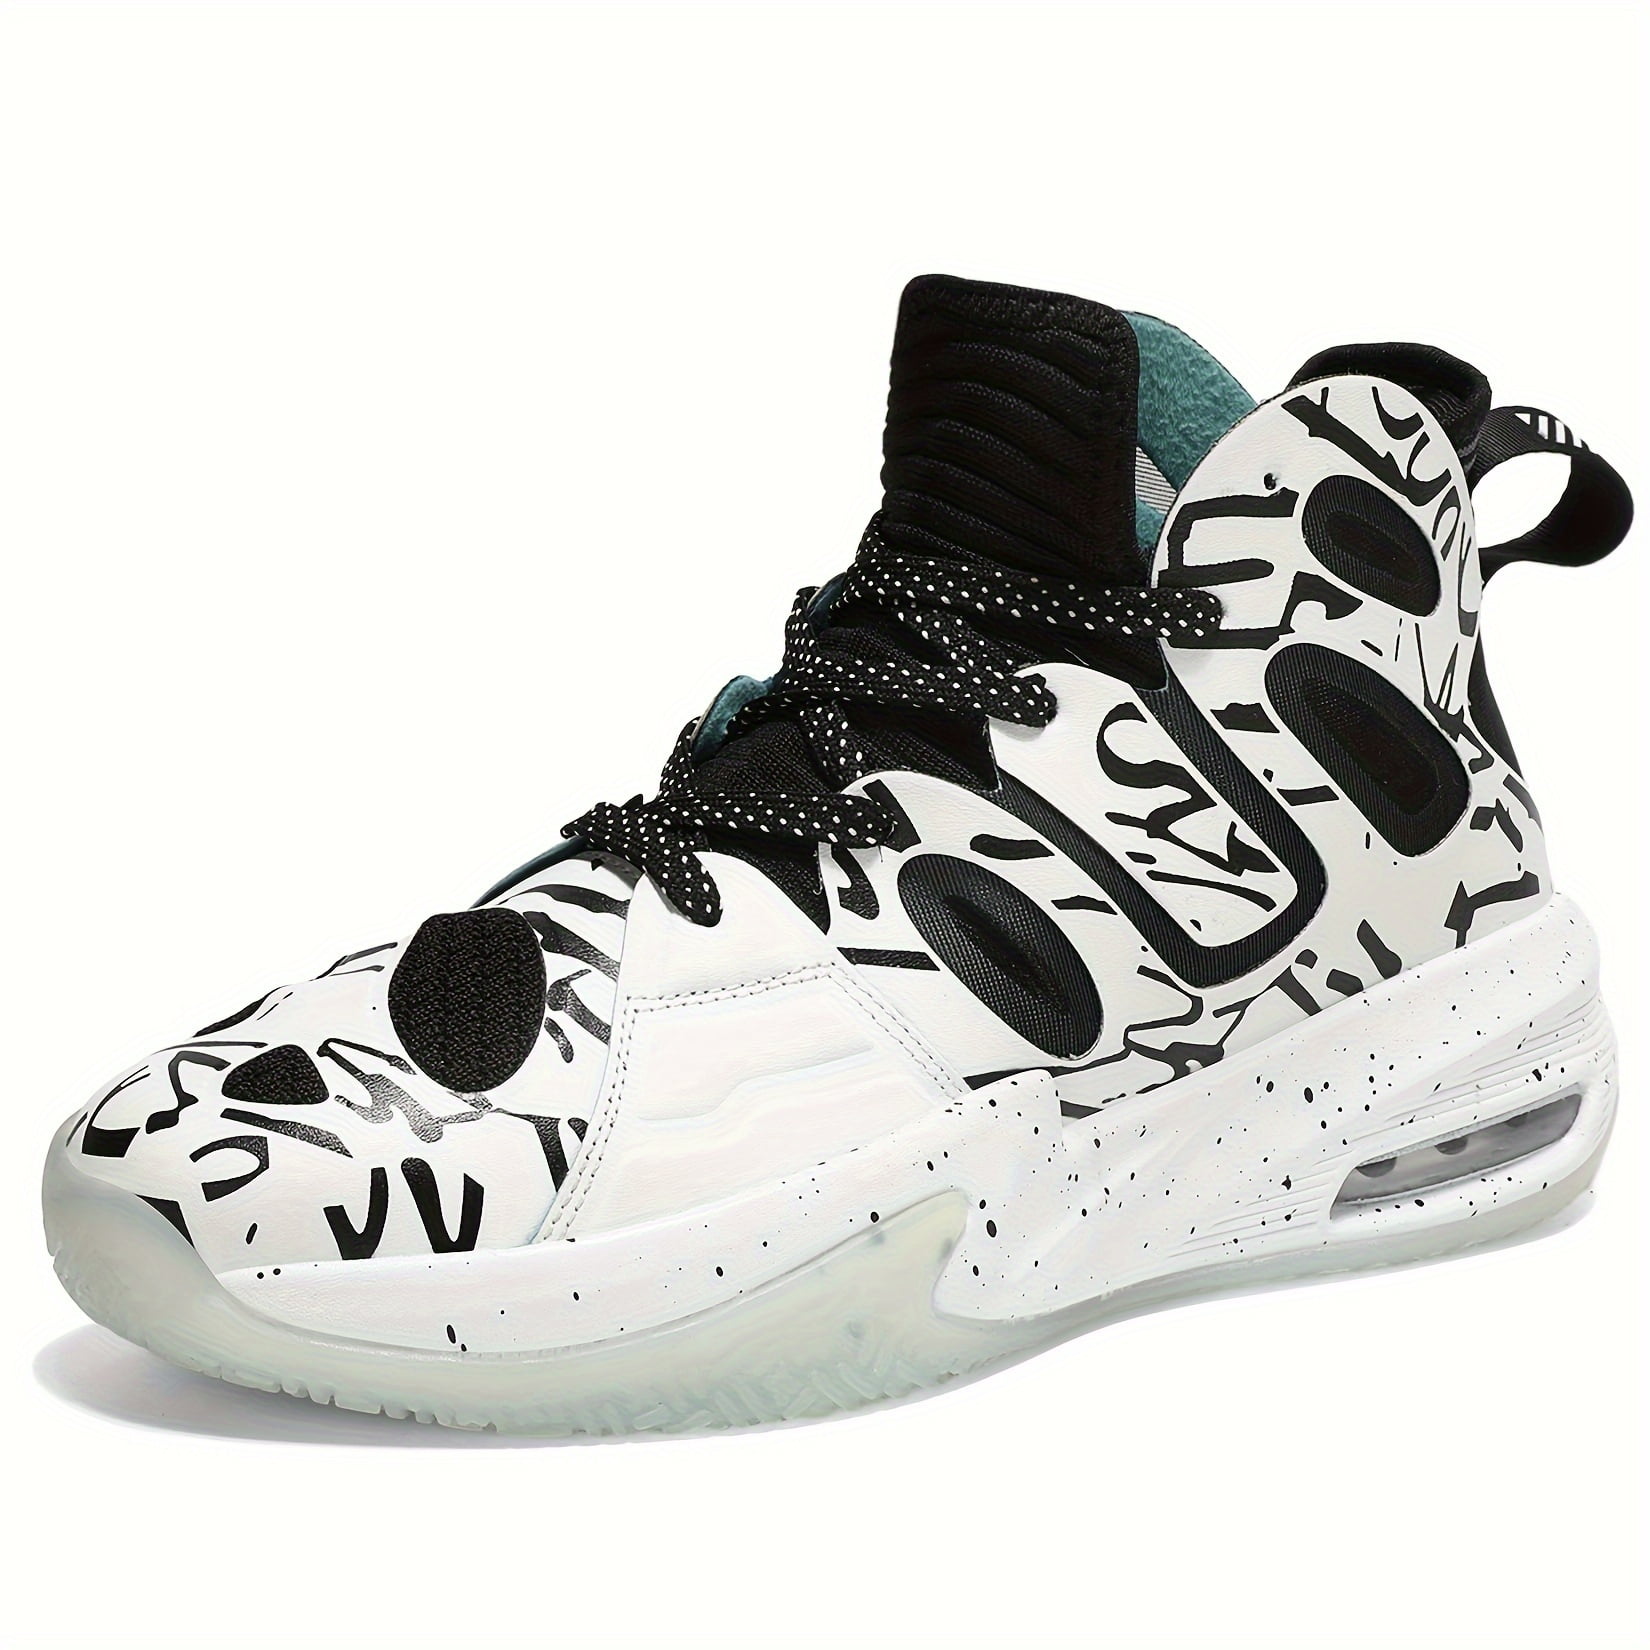 Men's Trendy High Top Basketball Shoes With Air Cushion, Comfy Non Slip ...